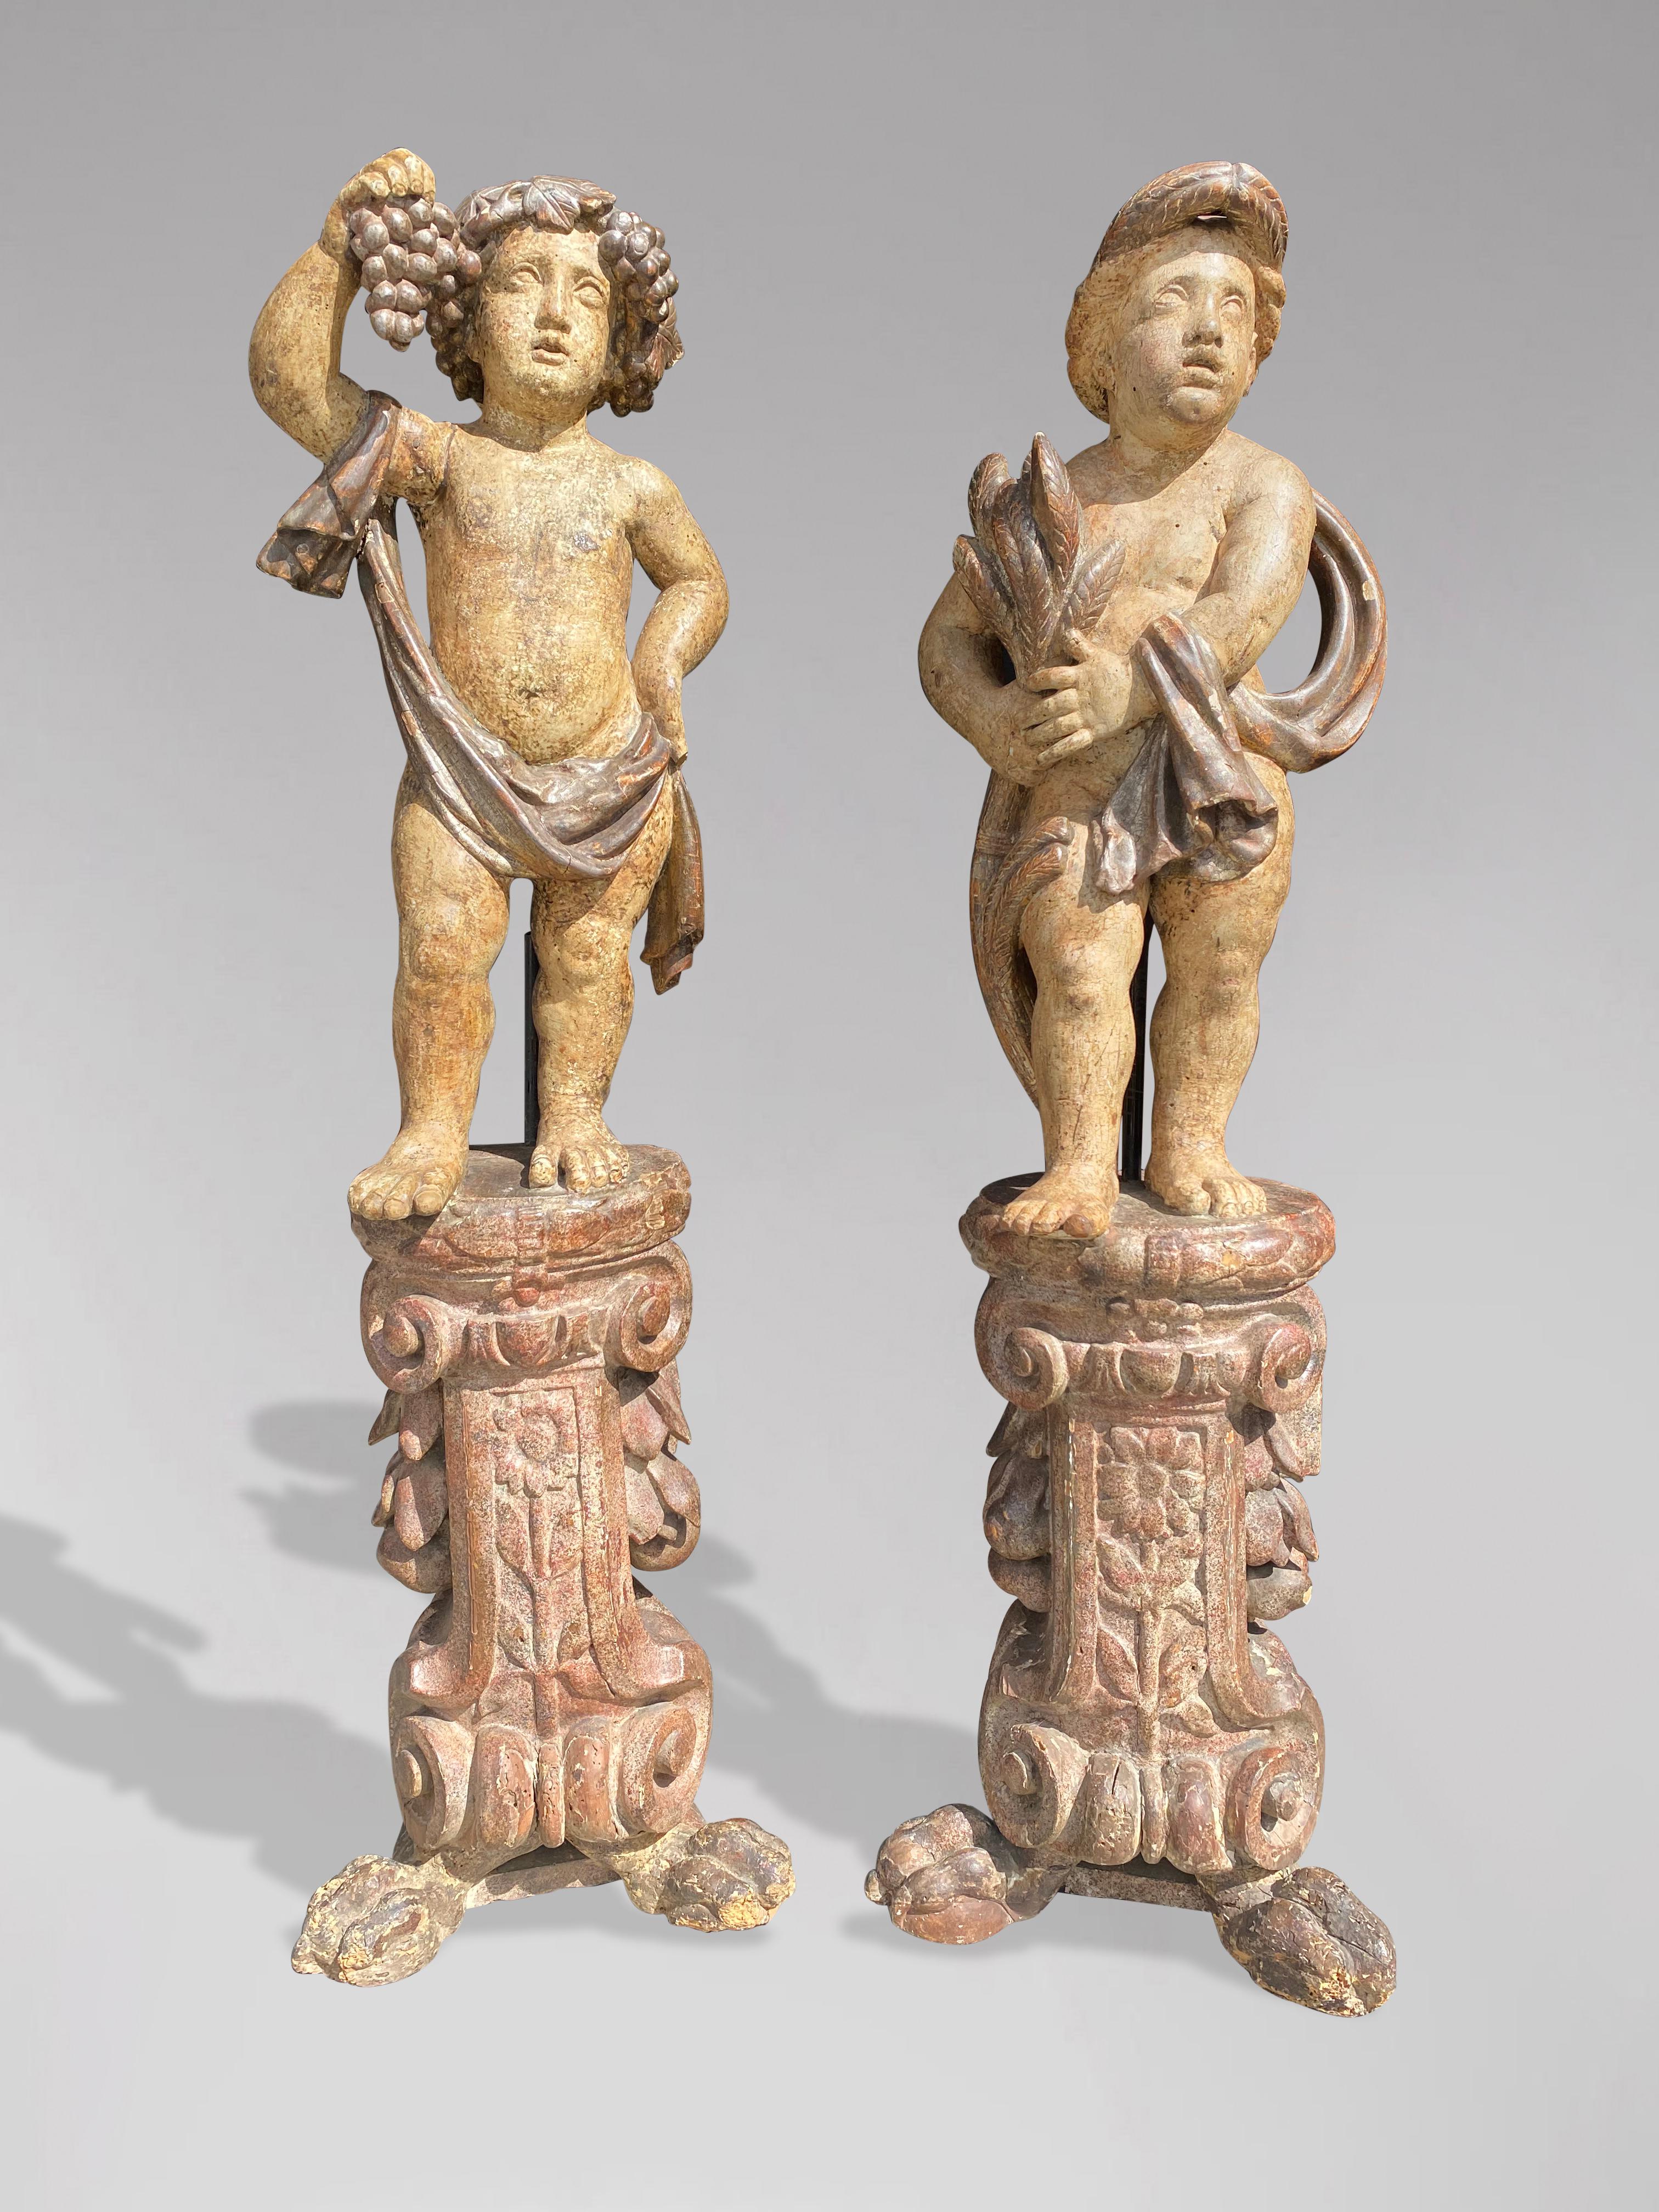 A fine pair of 18th century tall Italian carved wood harvest cherub sculptures. These sculptures each hold a piece of harvest aloft their curled heads, forms elegantly poised as if caught in a musical performance. A close eye will additionally